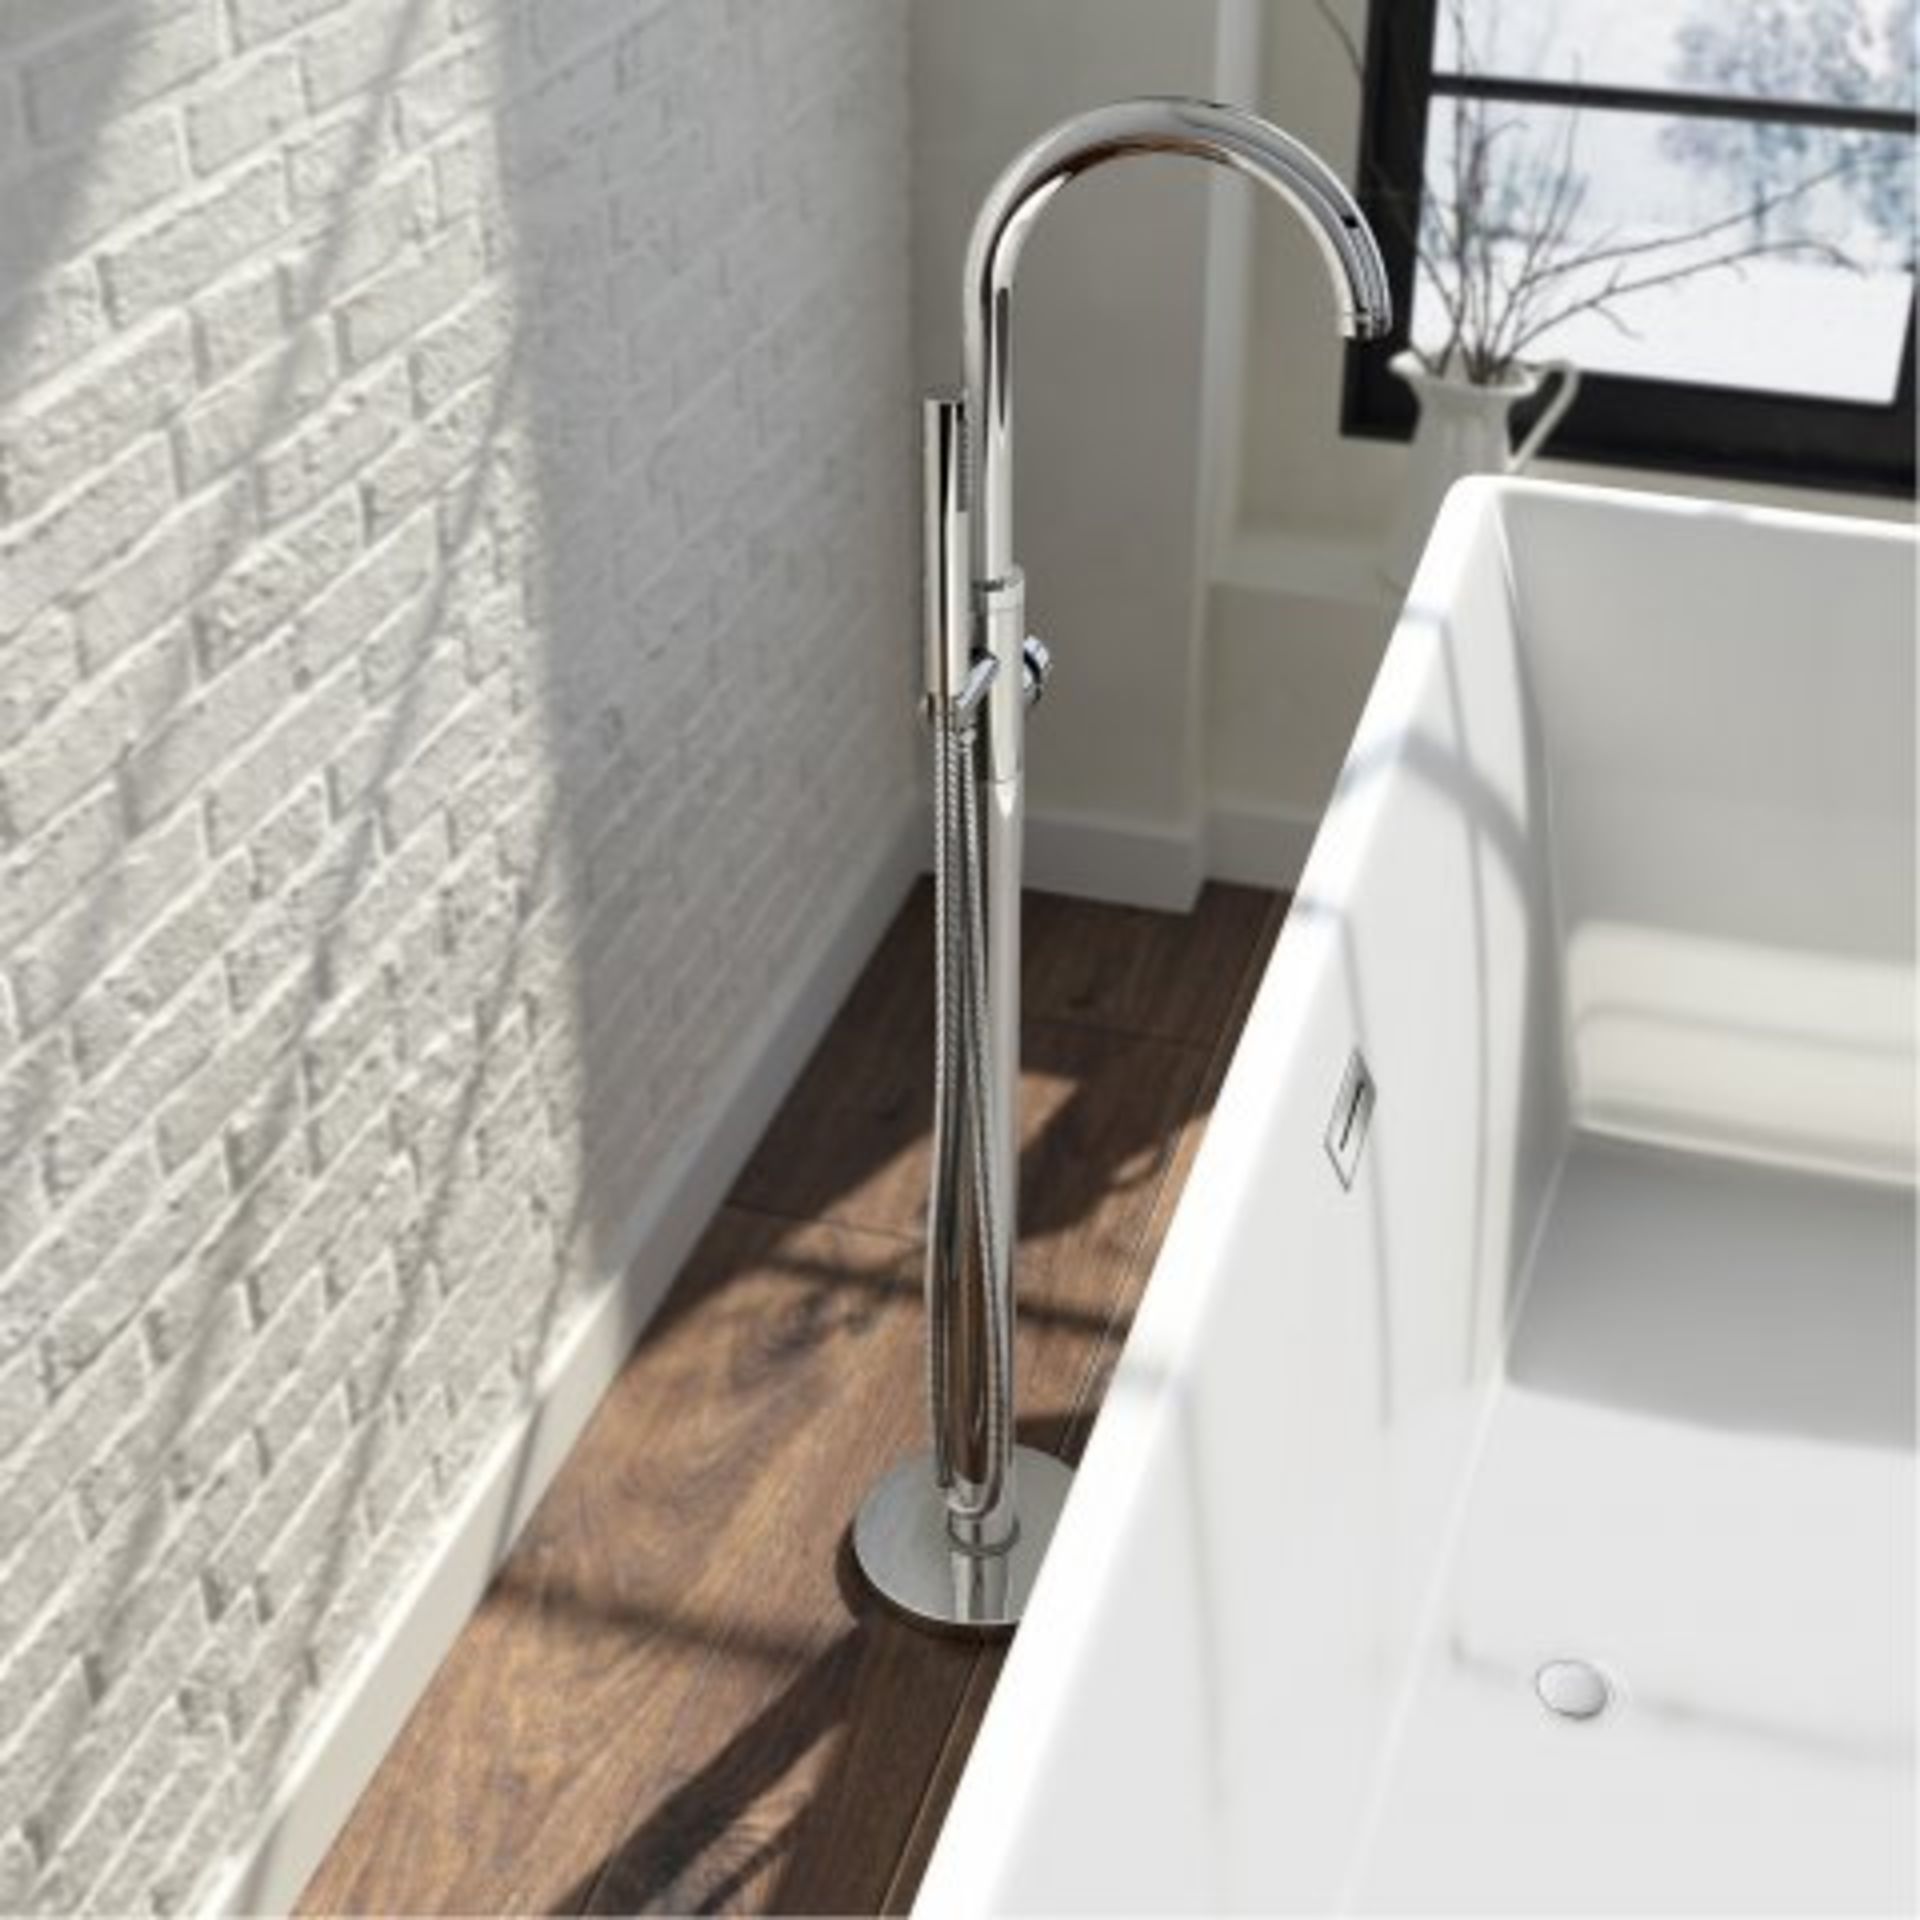 (20) Gladstone II Freestanding Bath Mixer Tap with Hand Held Shower Head Simplicity at its best: Our - Image 3 of 5